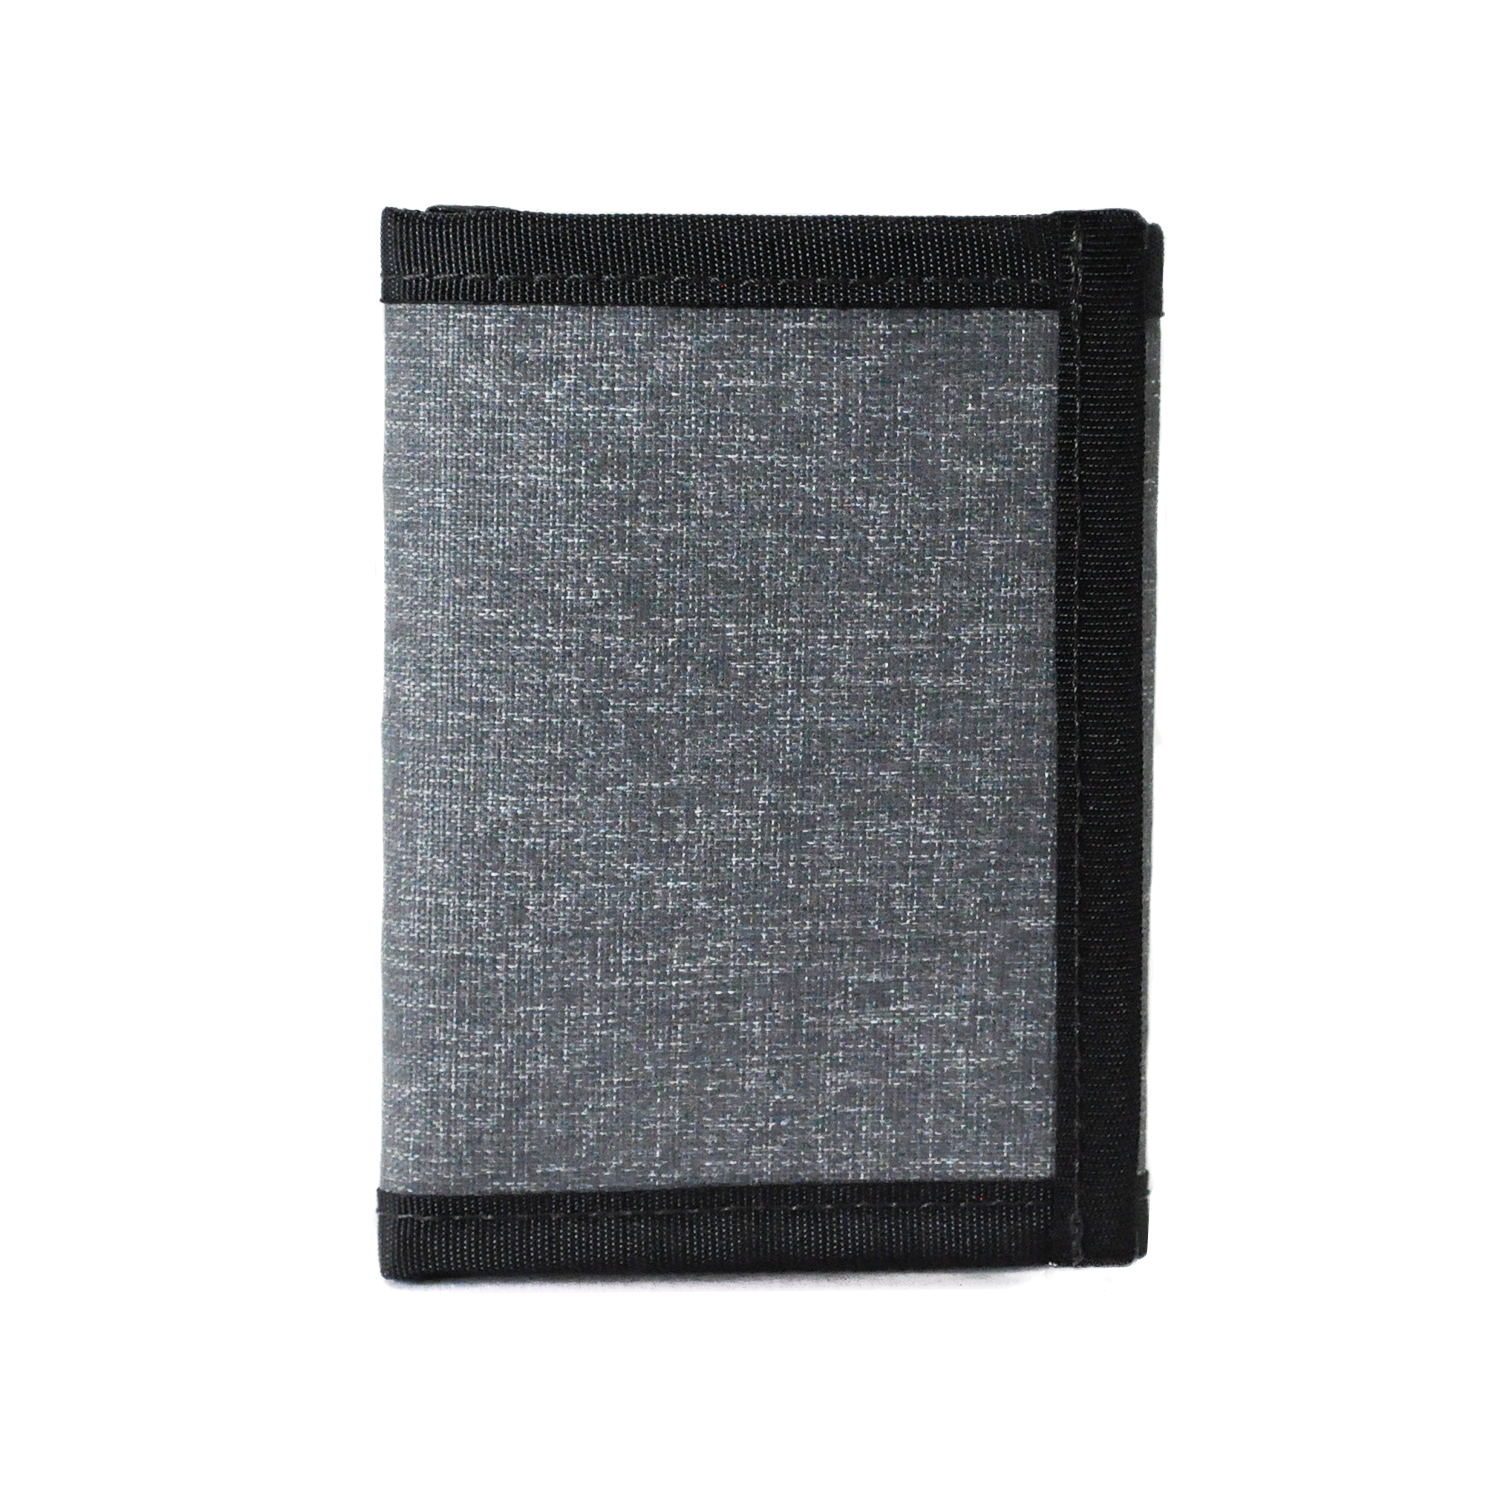 Flowfold Traveler Trifold Wallet Recycled Wallet of 100% Recycled Polyester EcoPak Heather Grey